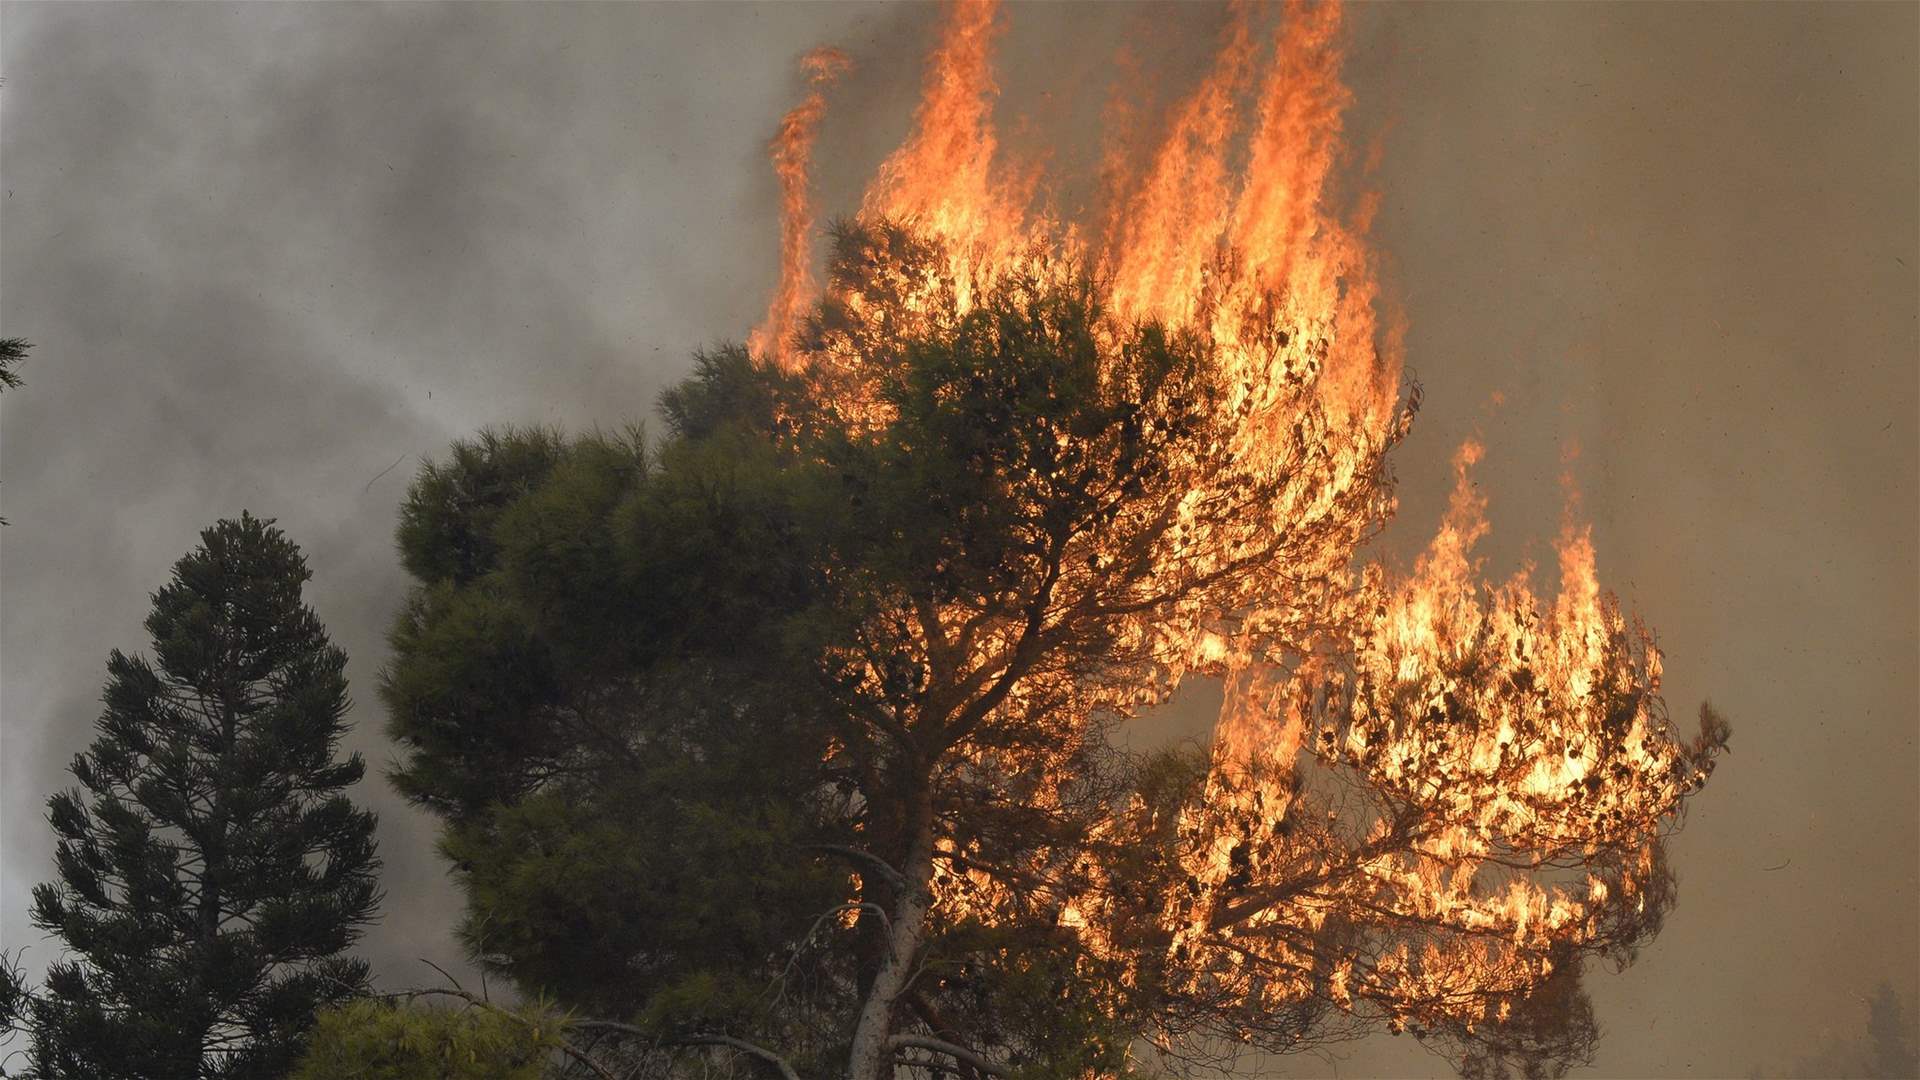 Heatwaves and wildfires: Lebanon braces for high fire risk amid soaring temperatures